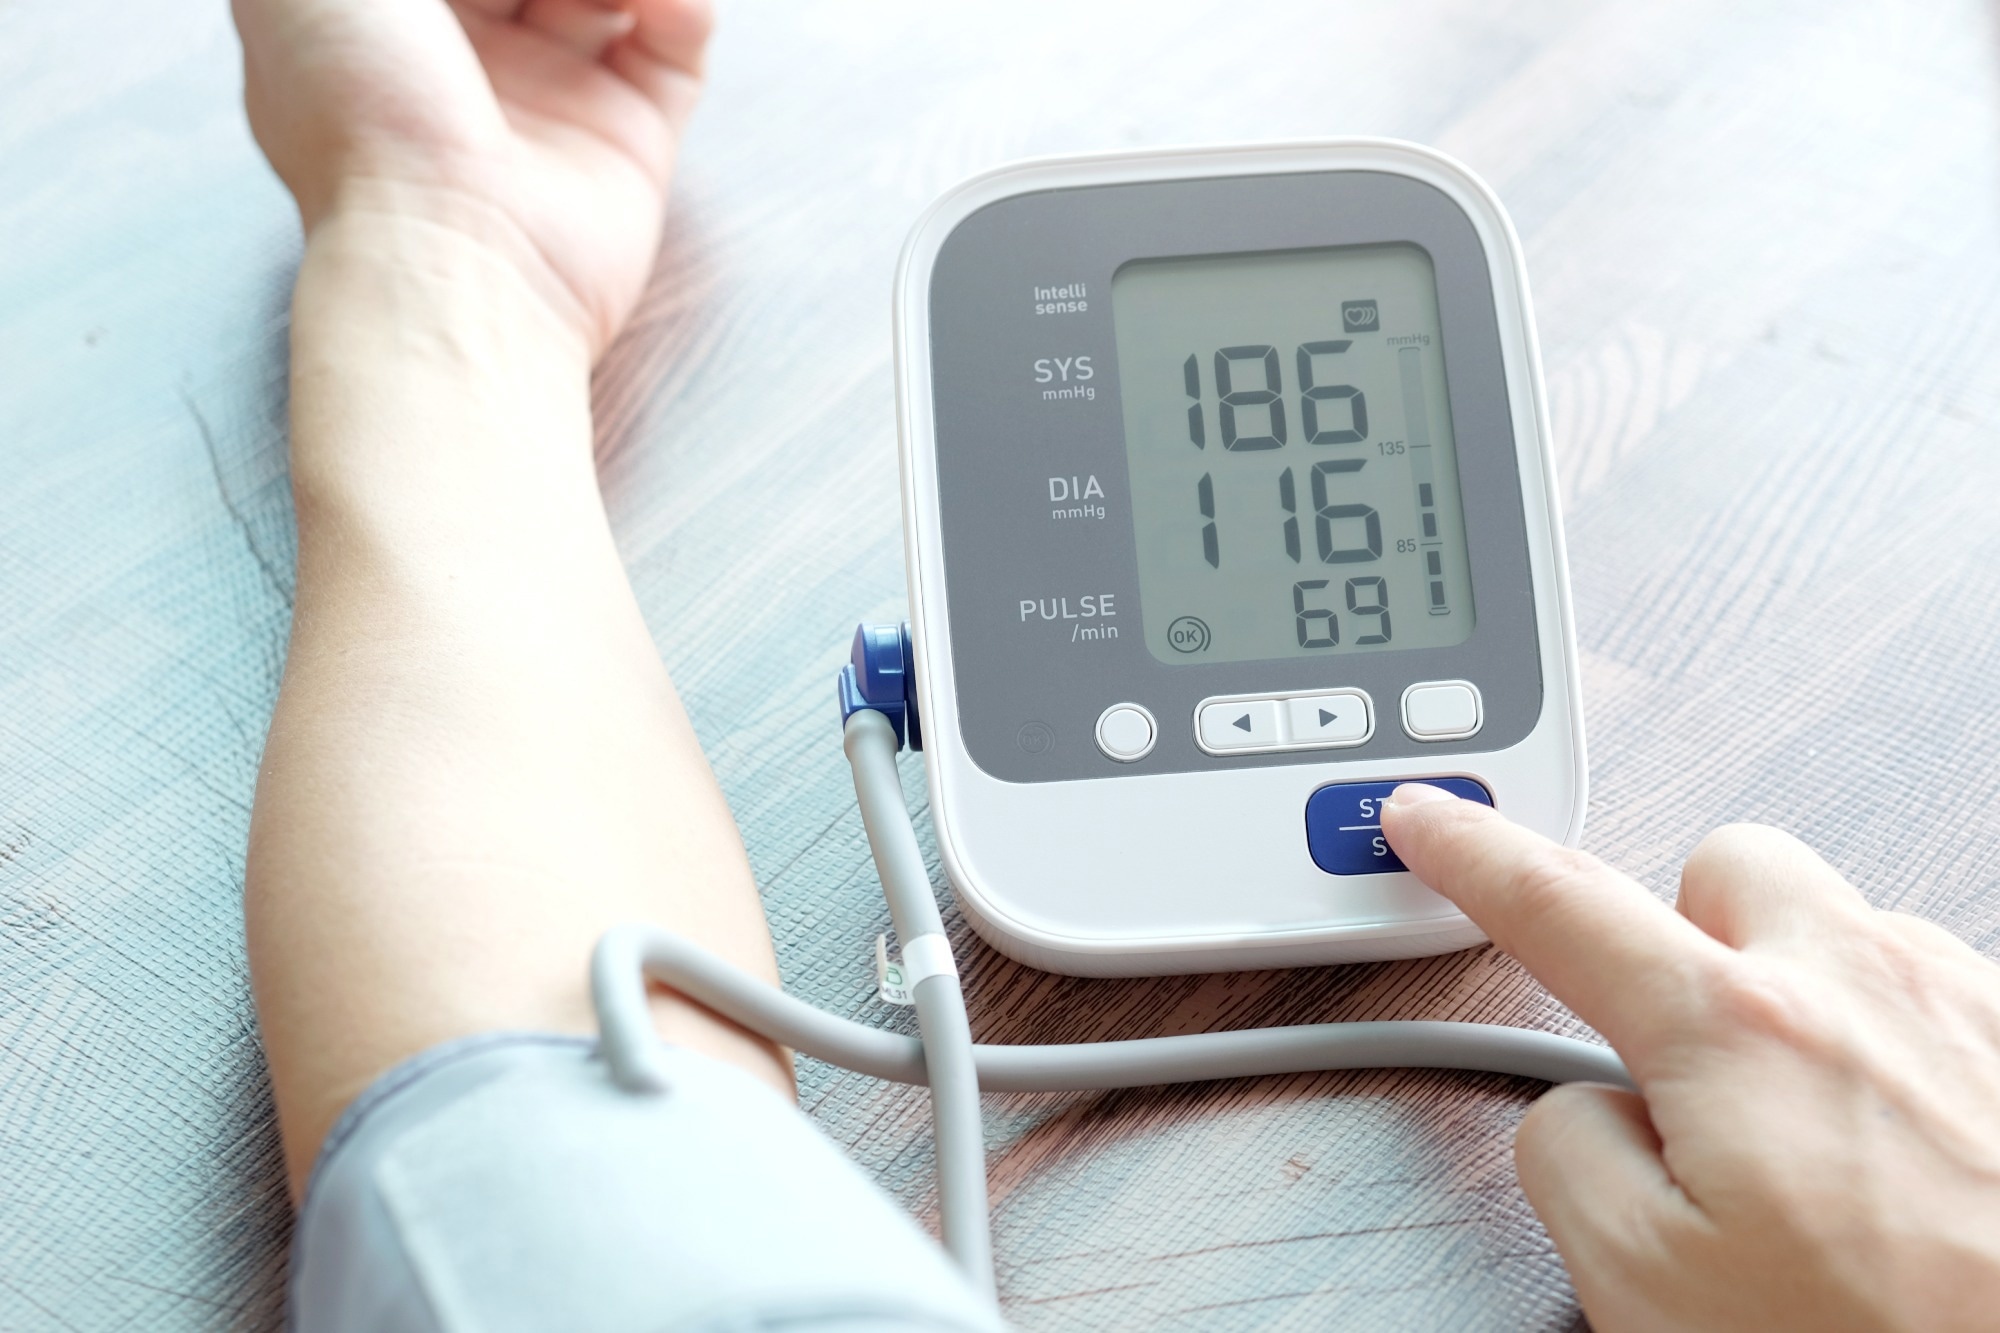 Blood pressure monitor and heart rate monitor. Image Credit: Me dia / Shutterstock